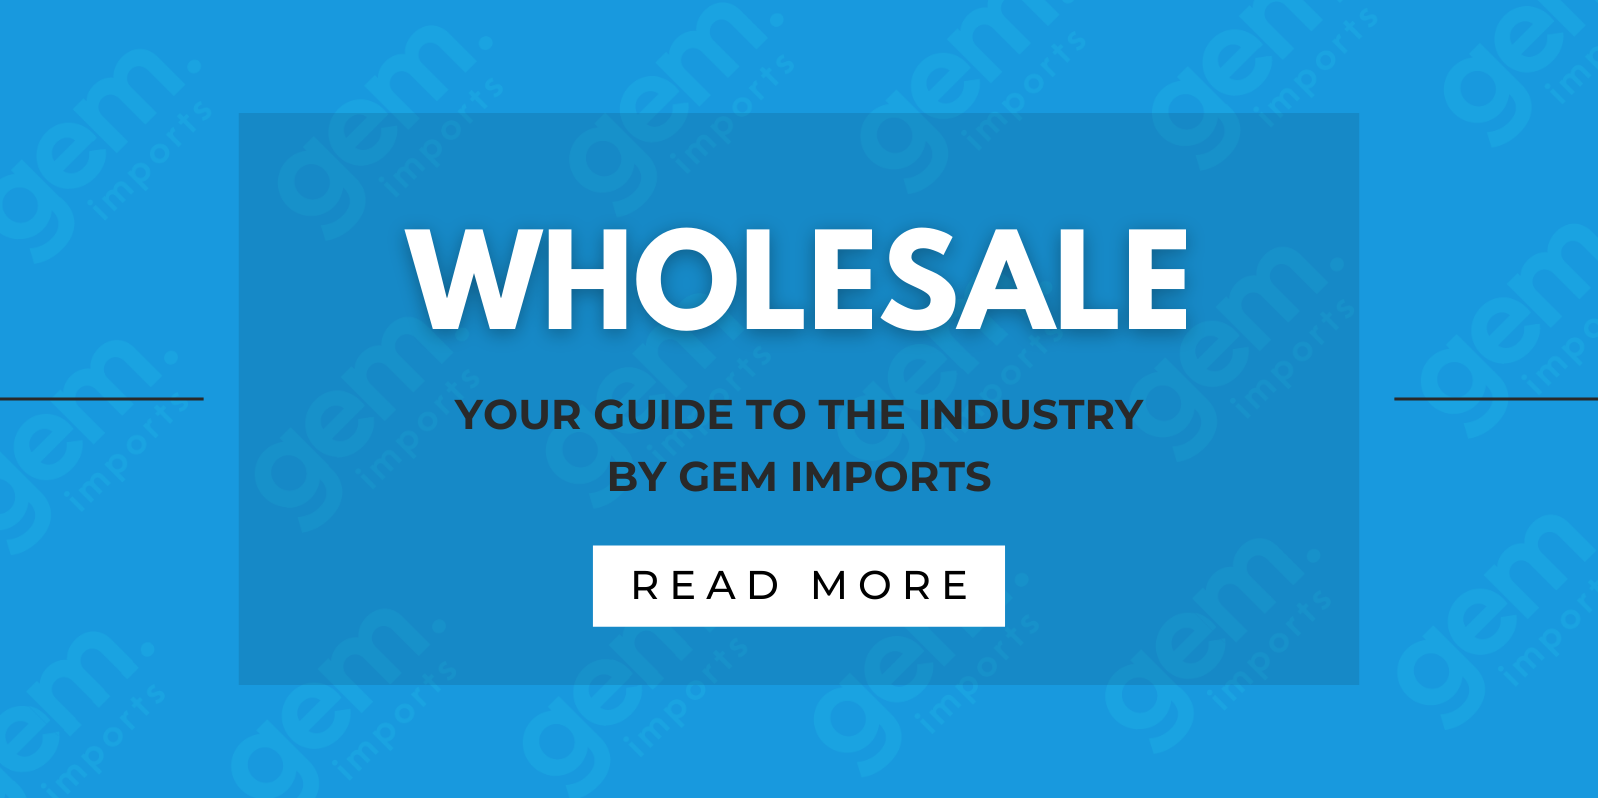 Wholesale Suppliers Guide